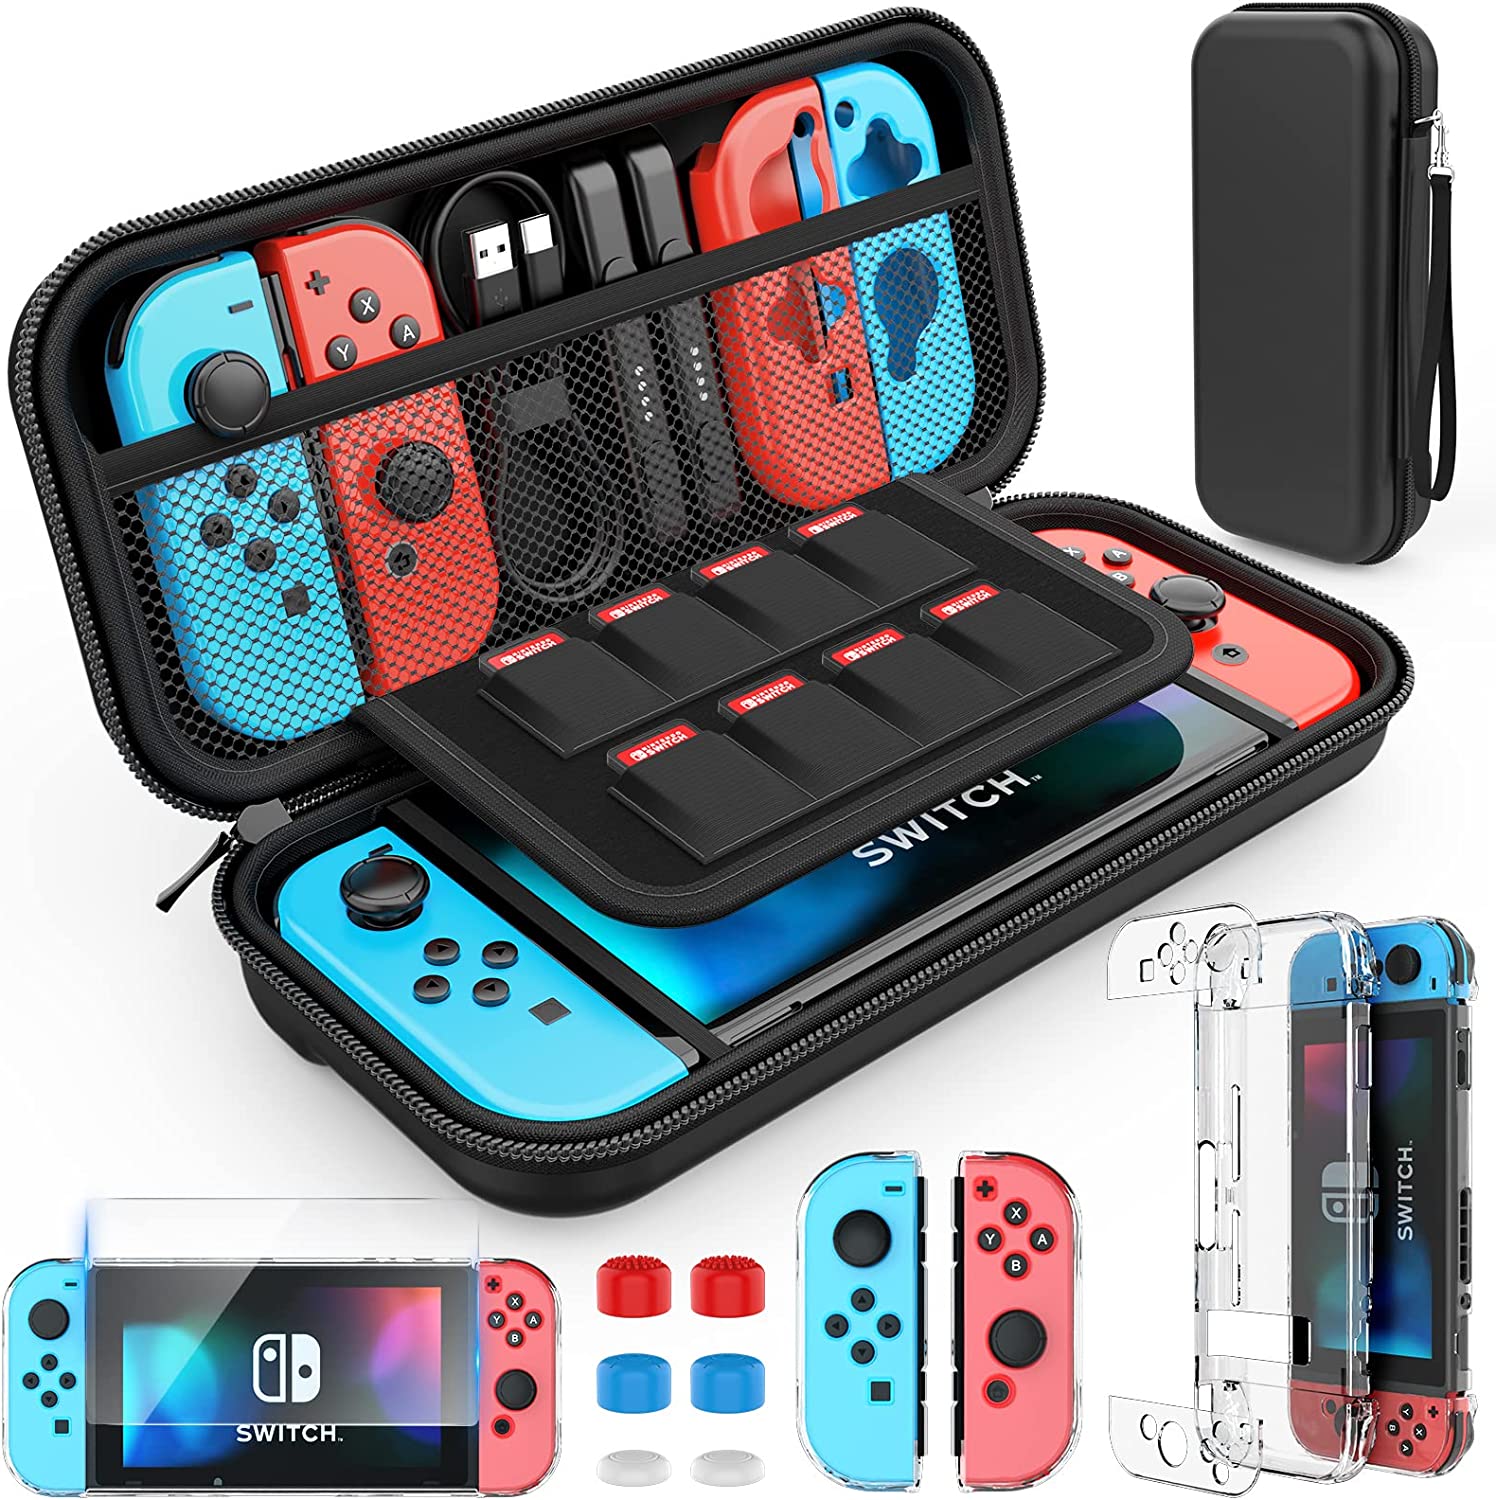 Carrying case for Nintendo Switch.